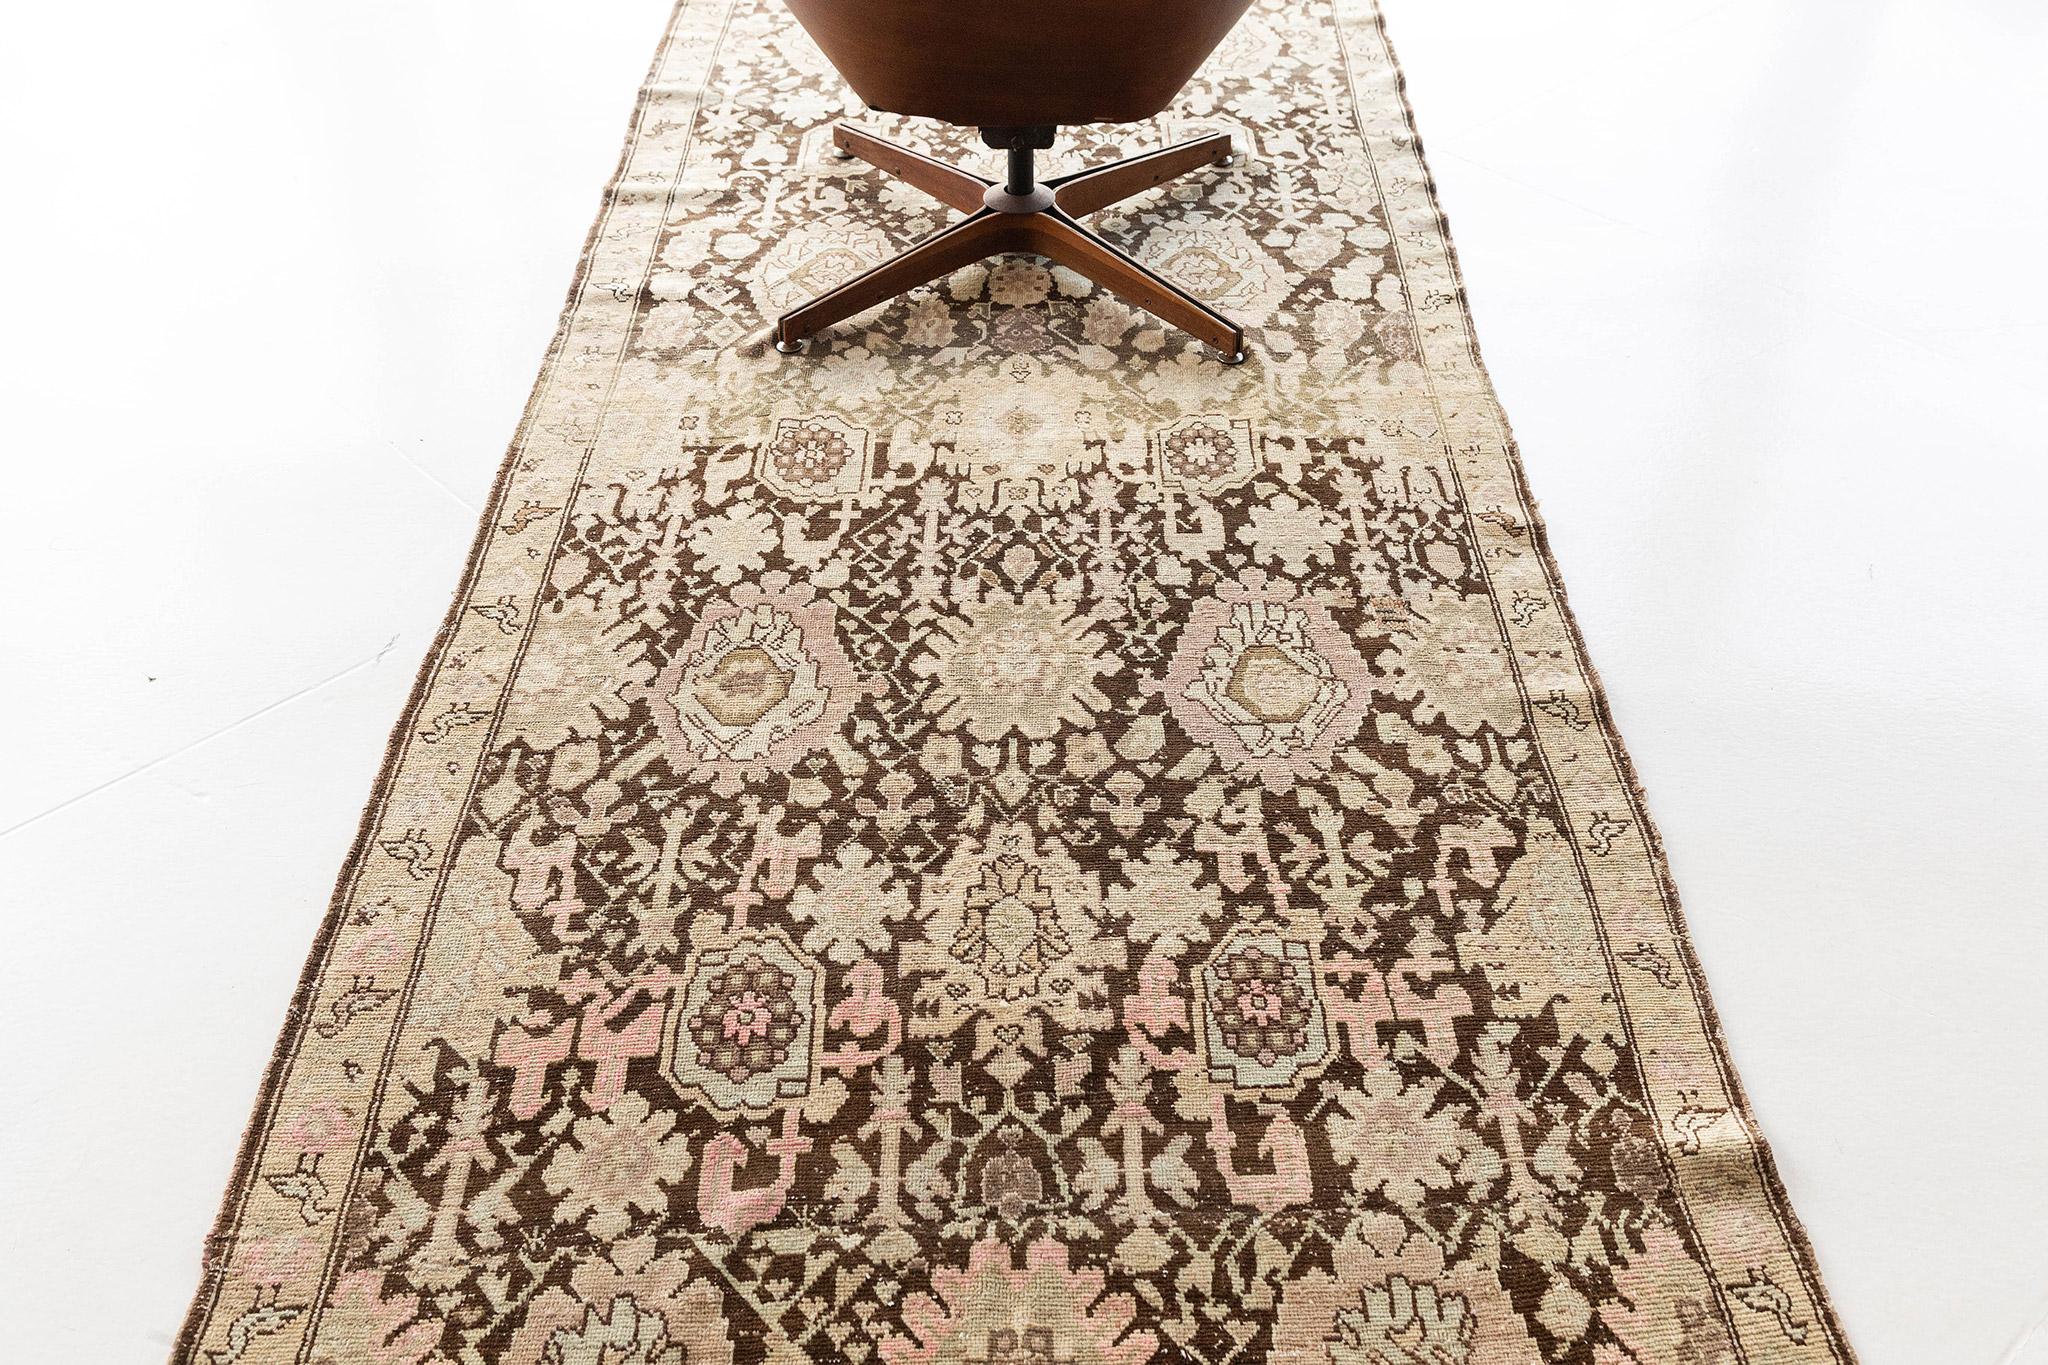 This sophisticated Gharabagh runner features a large all-over design pattern that saunters gorgeous floral designs. The contrast in colors against the black foreground is sure to add a luxurious addition to your interior.

Rug Number
26860
Size
4'